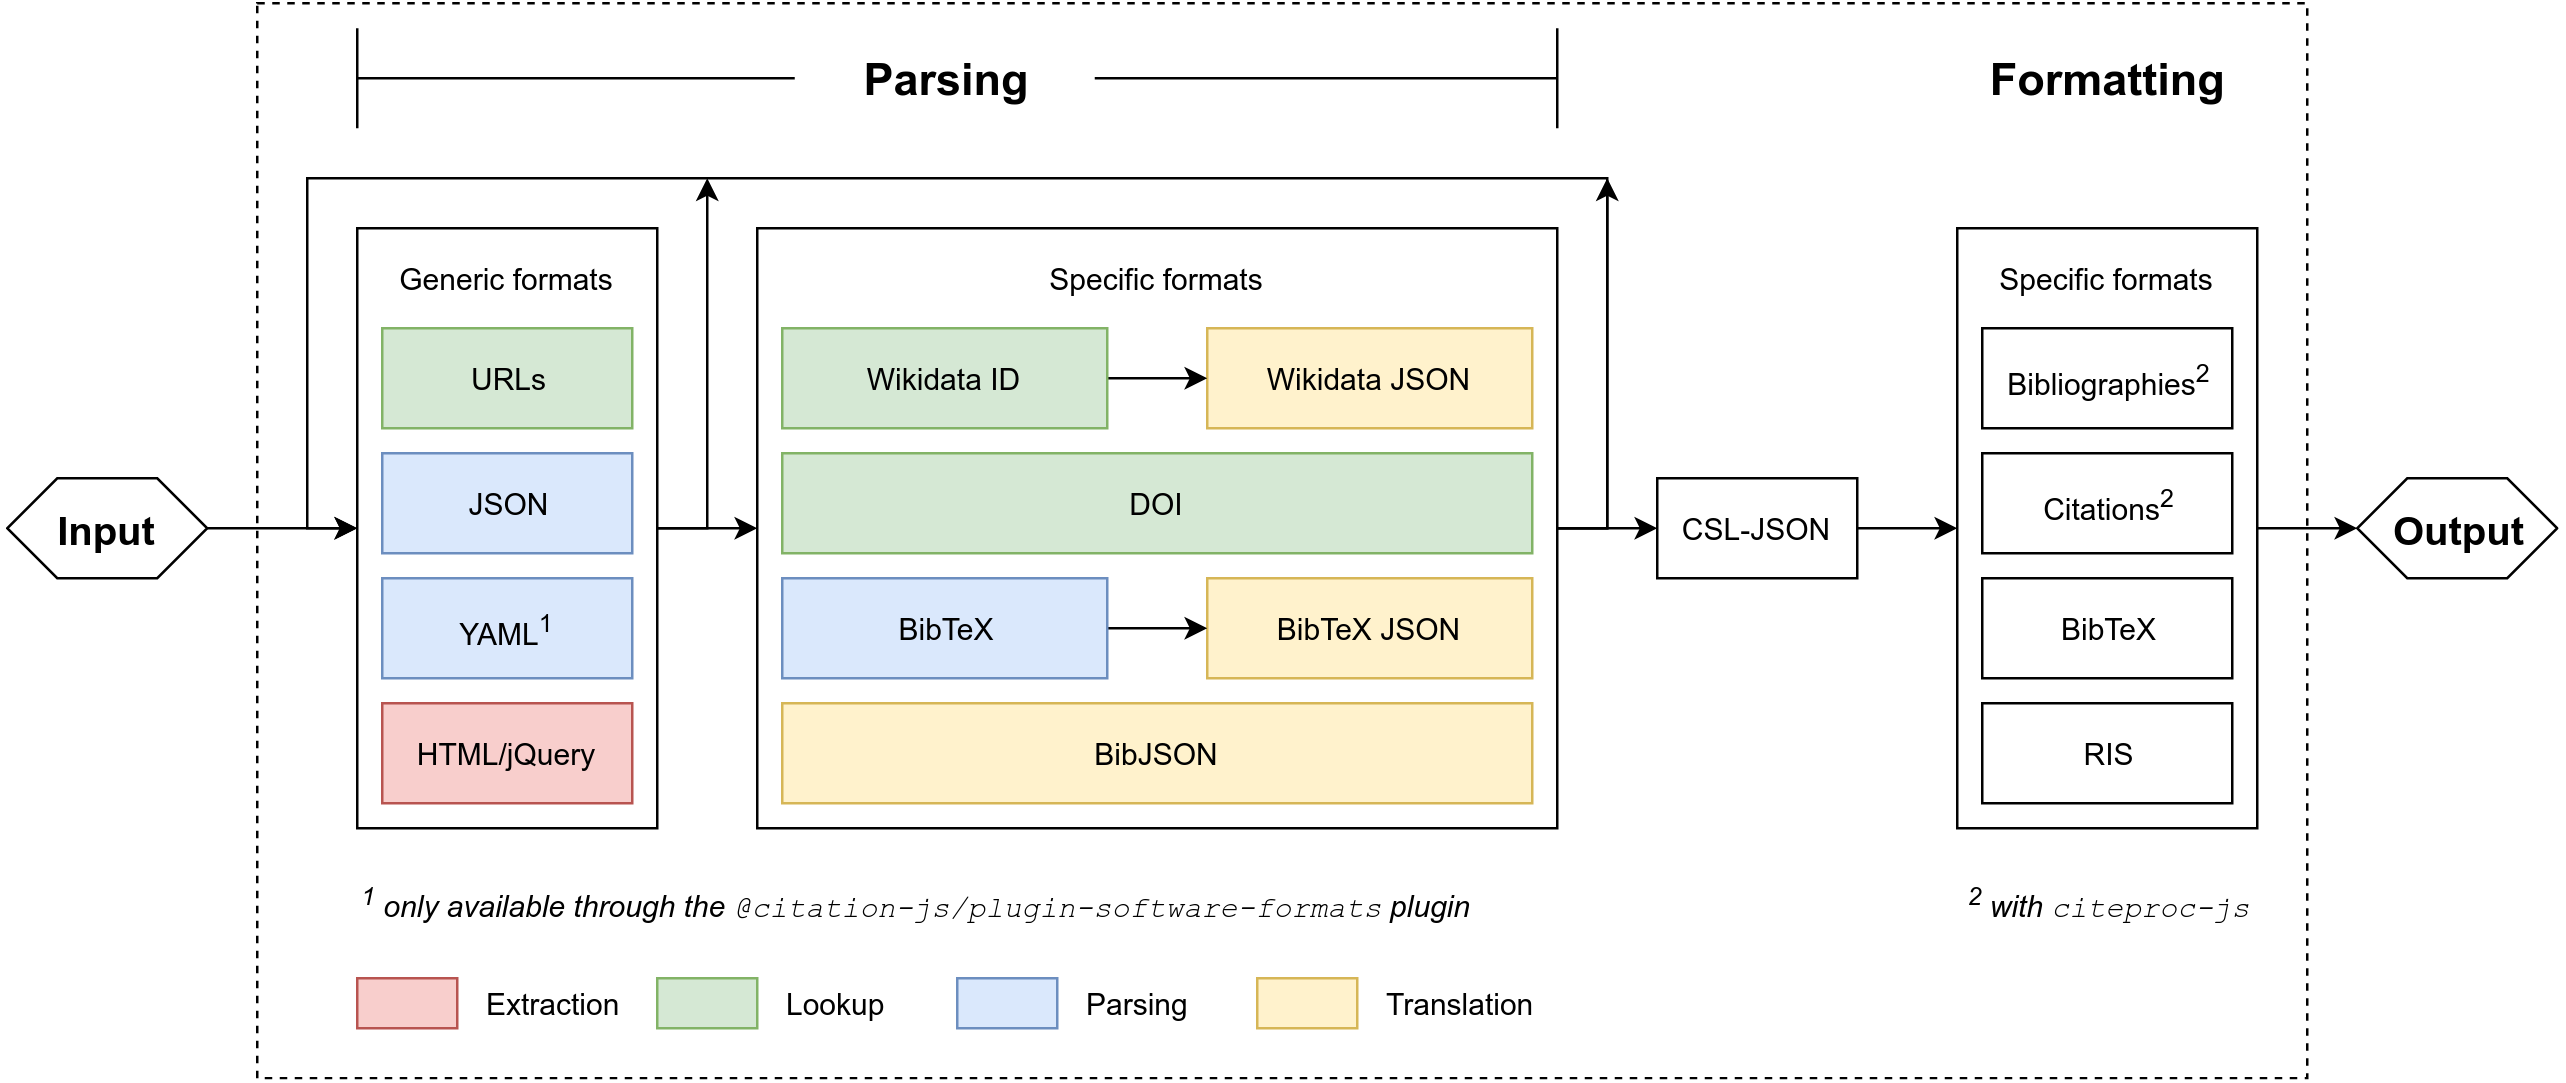 Citation Js A Format Independent Modular Bibliography Tool For The Browser And Command Line Peerj